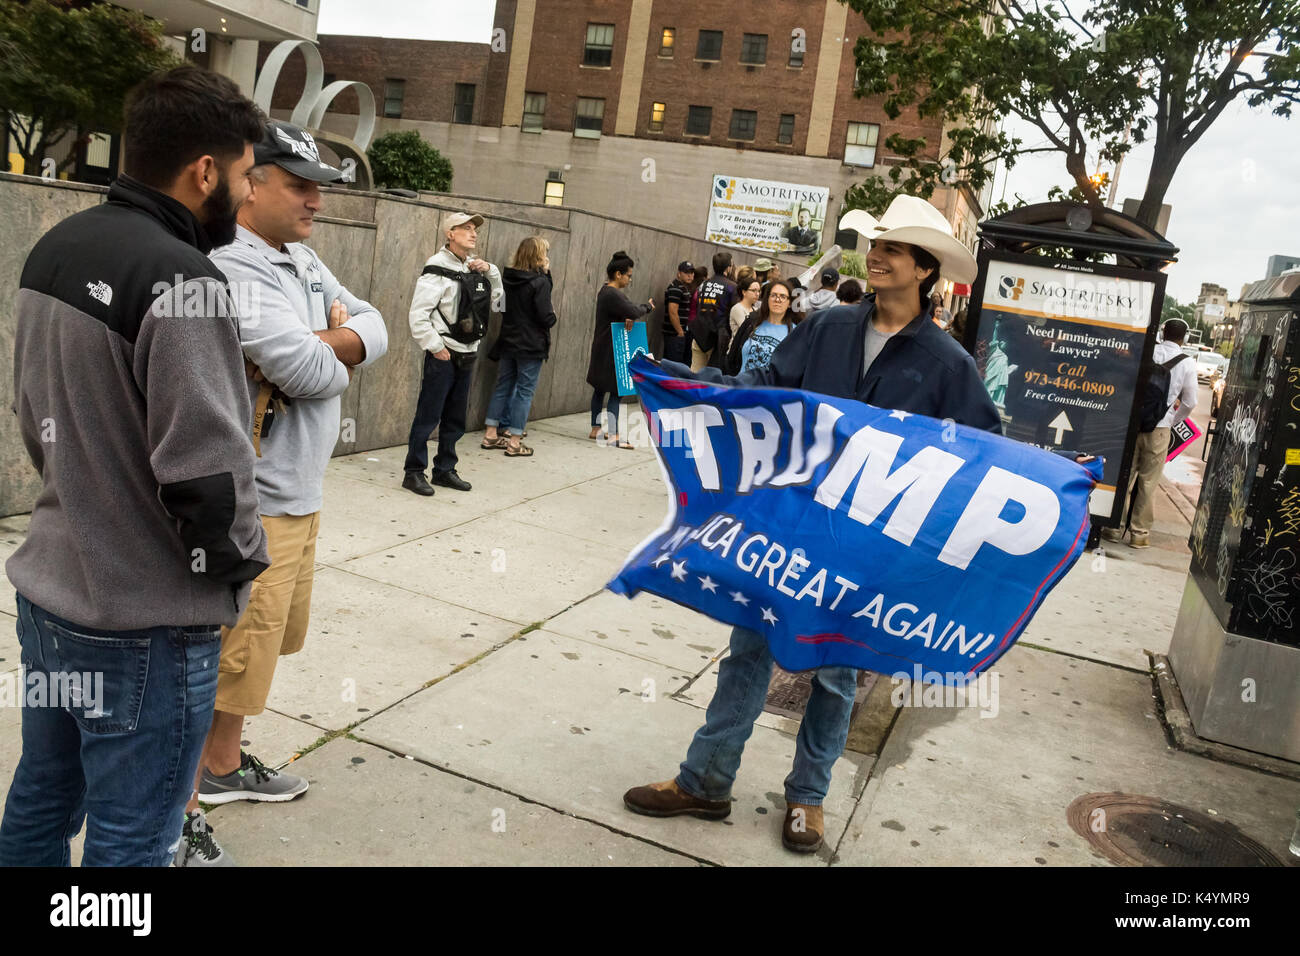 Newark, United States. 6th September, 2017. A Donald Trump supporter waves his flag in support of the removal of DACA as the crowd jeers at his display. DACA is an Obama era legislation that allows those who immigrated as children to remain in the USA on a special visa. Almost 800,000 people are under threat of deportation. Most of those threatened with deportation are students who have been living inside the country for years. Mack William Regan/Alamy Live News Stock Photo